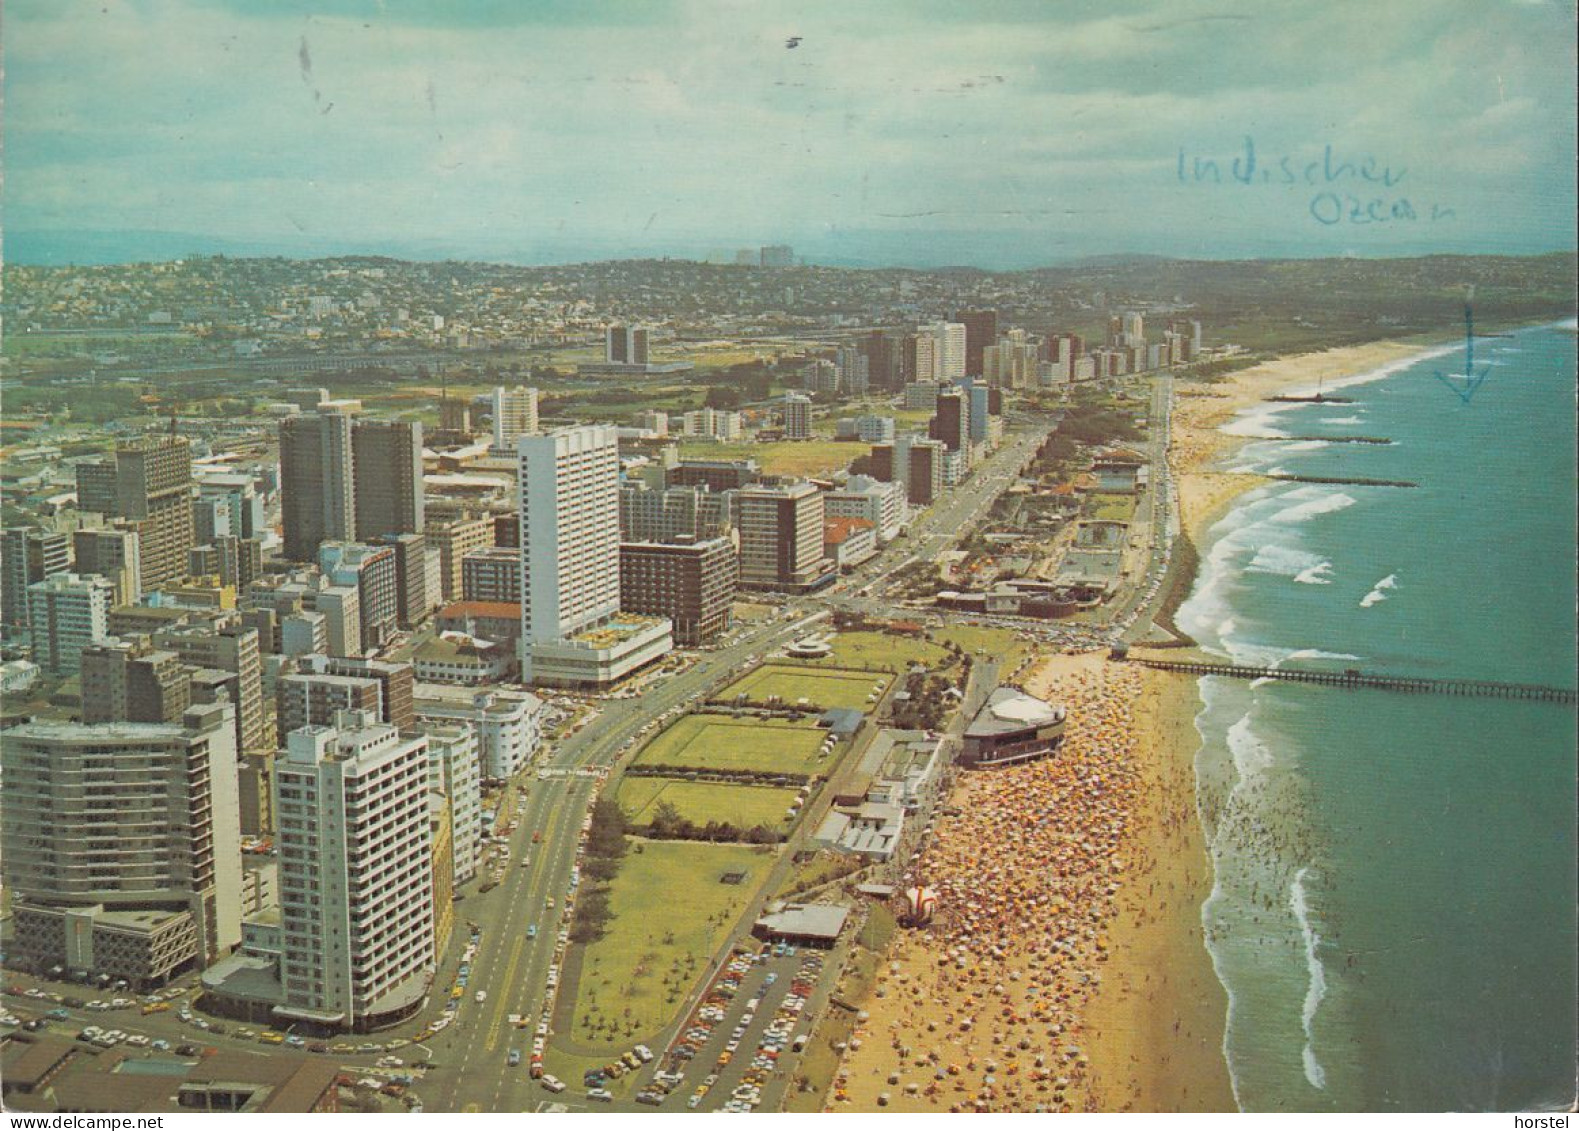 South Africa - Durban - "The Golden Mile" - Coast - Aerial View - Nice Stamp - Afrique Du Sud